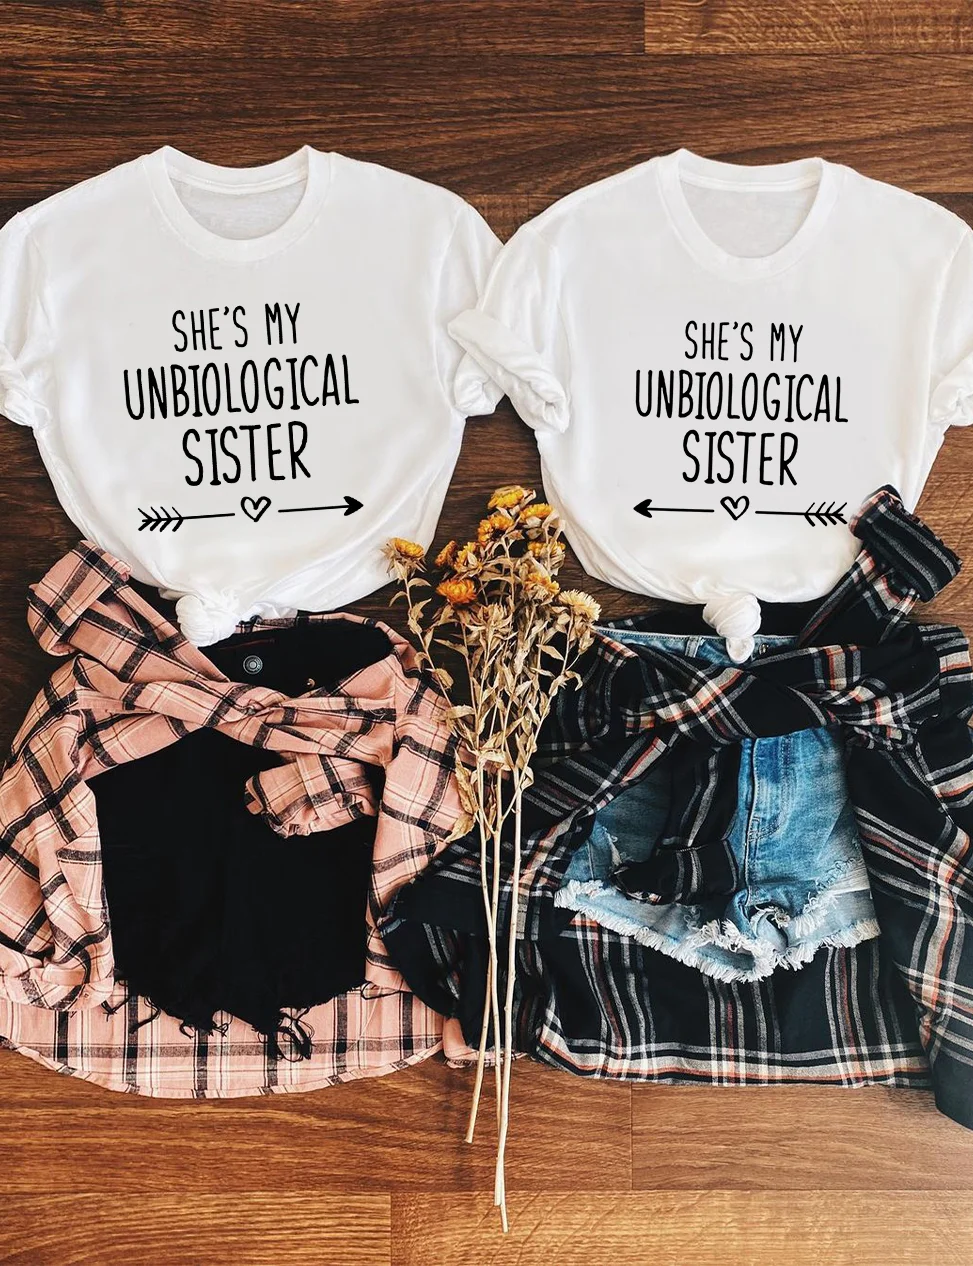 She's My Unbiological Sister T-Shirt